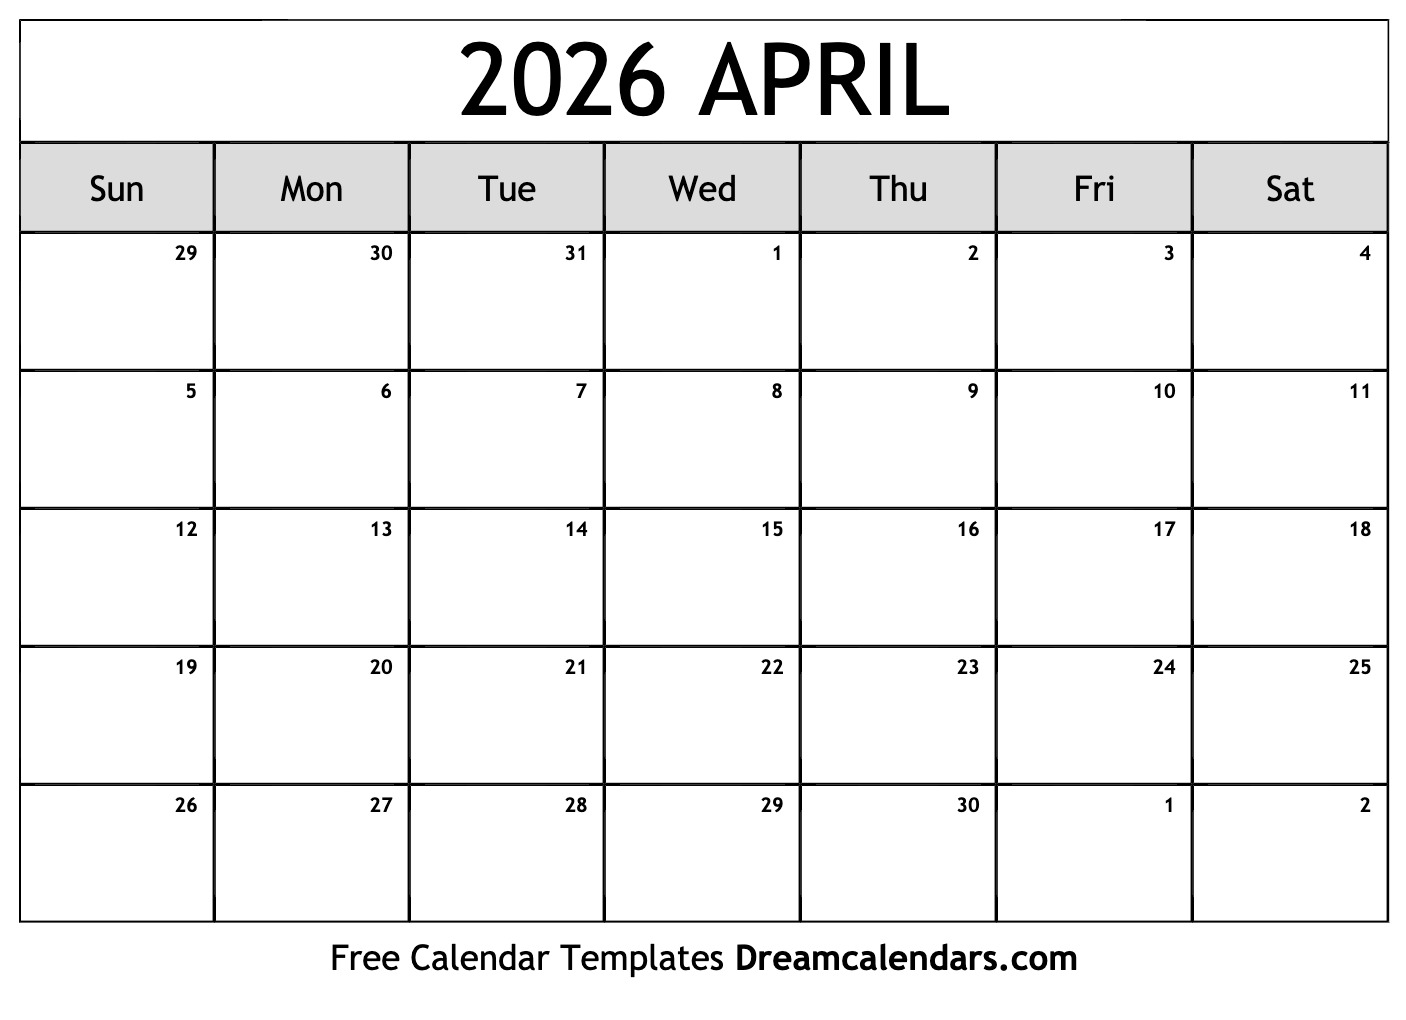 April 2026 Calendar Free Printable with Holidays and Observances